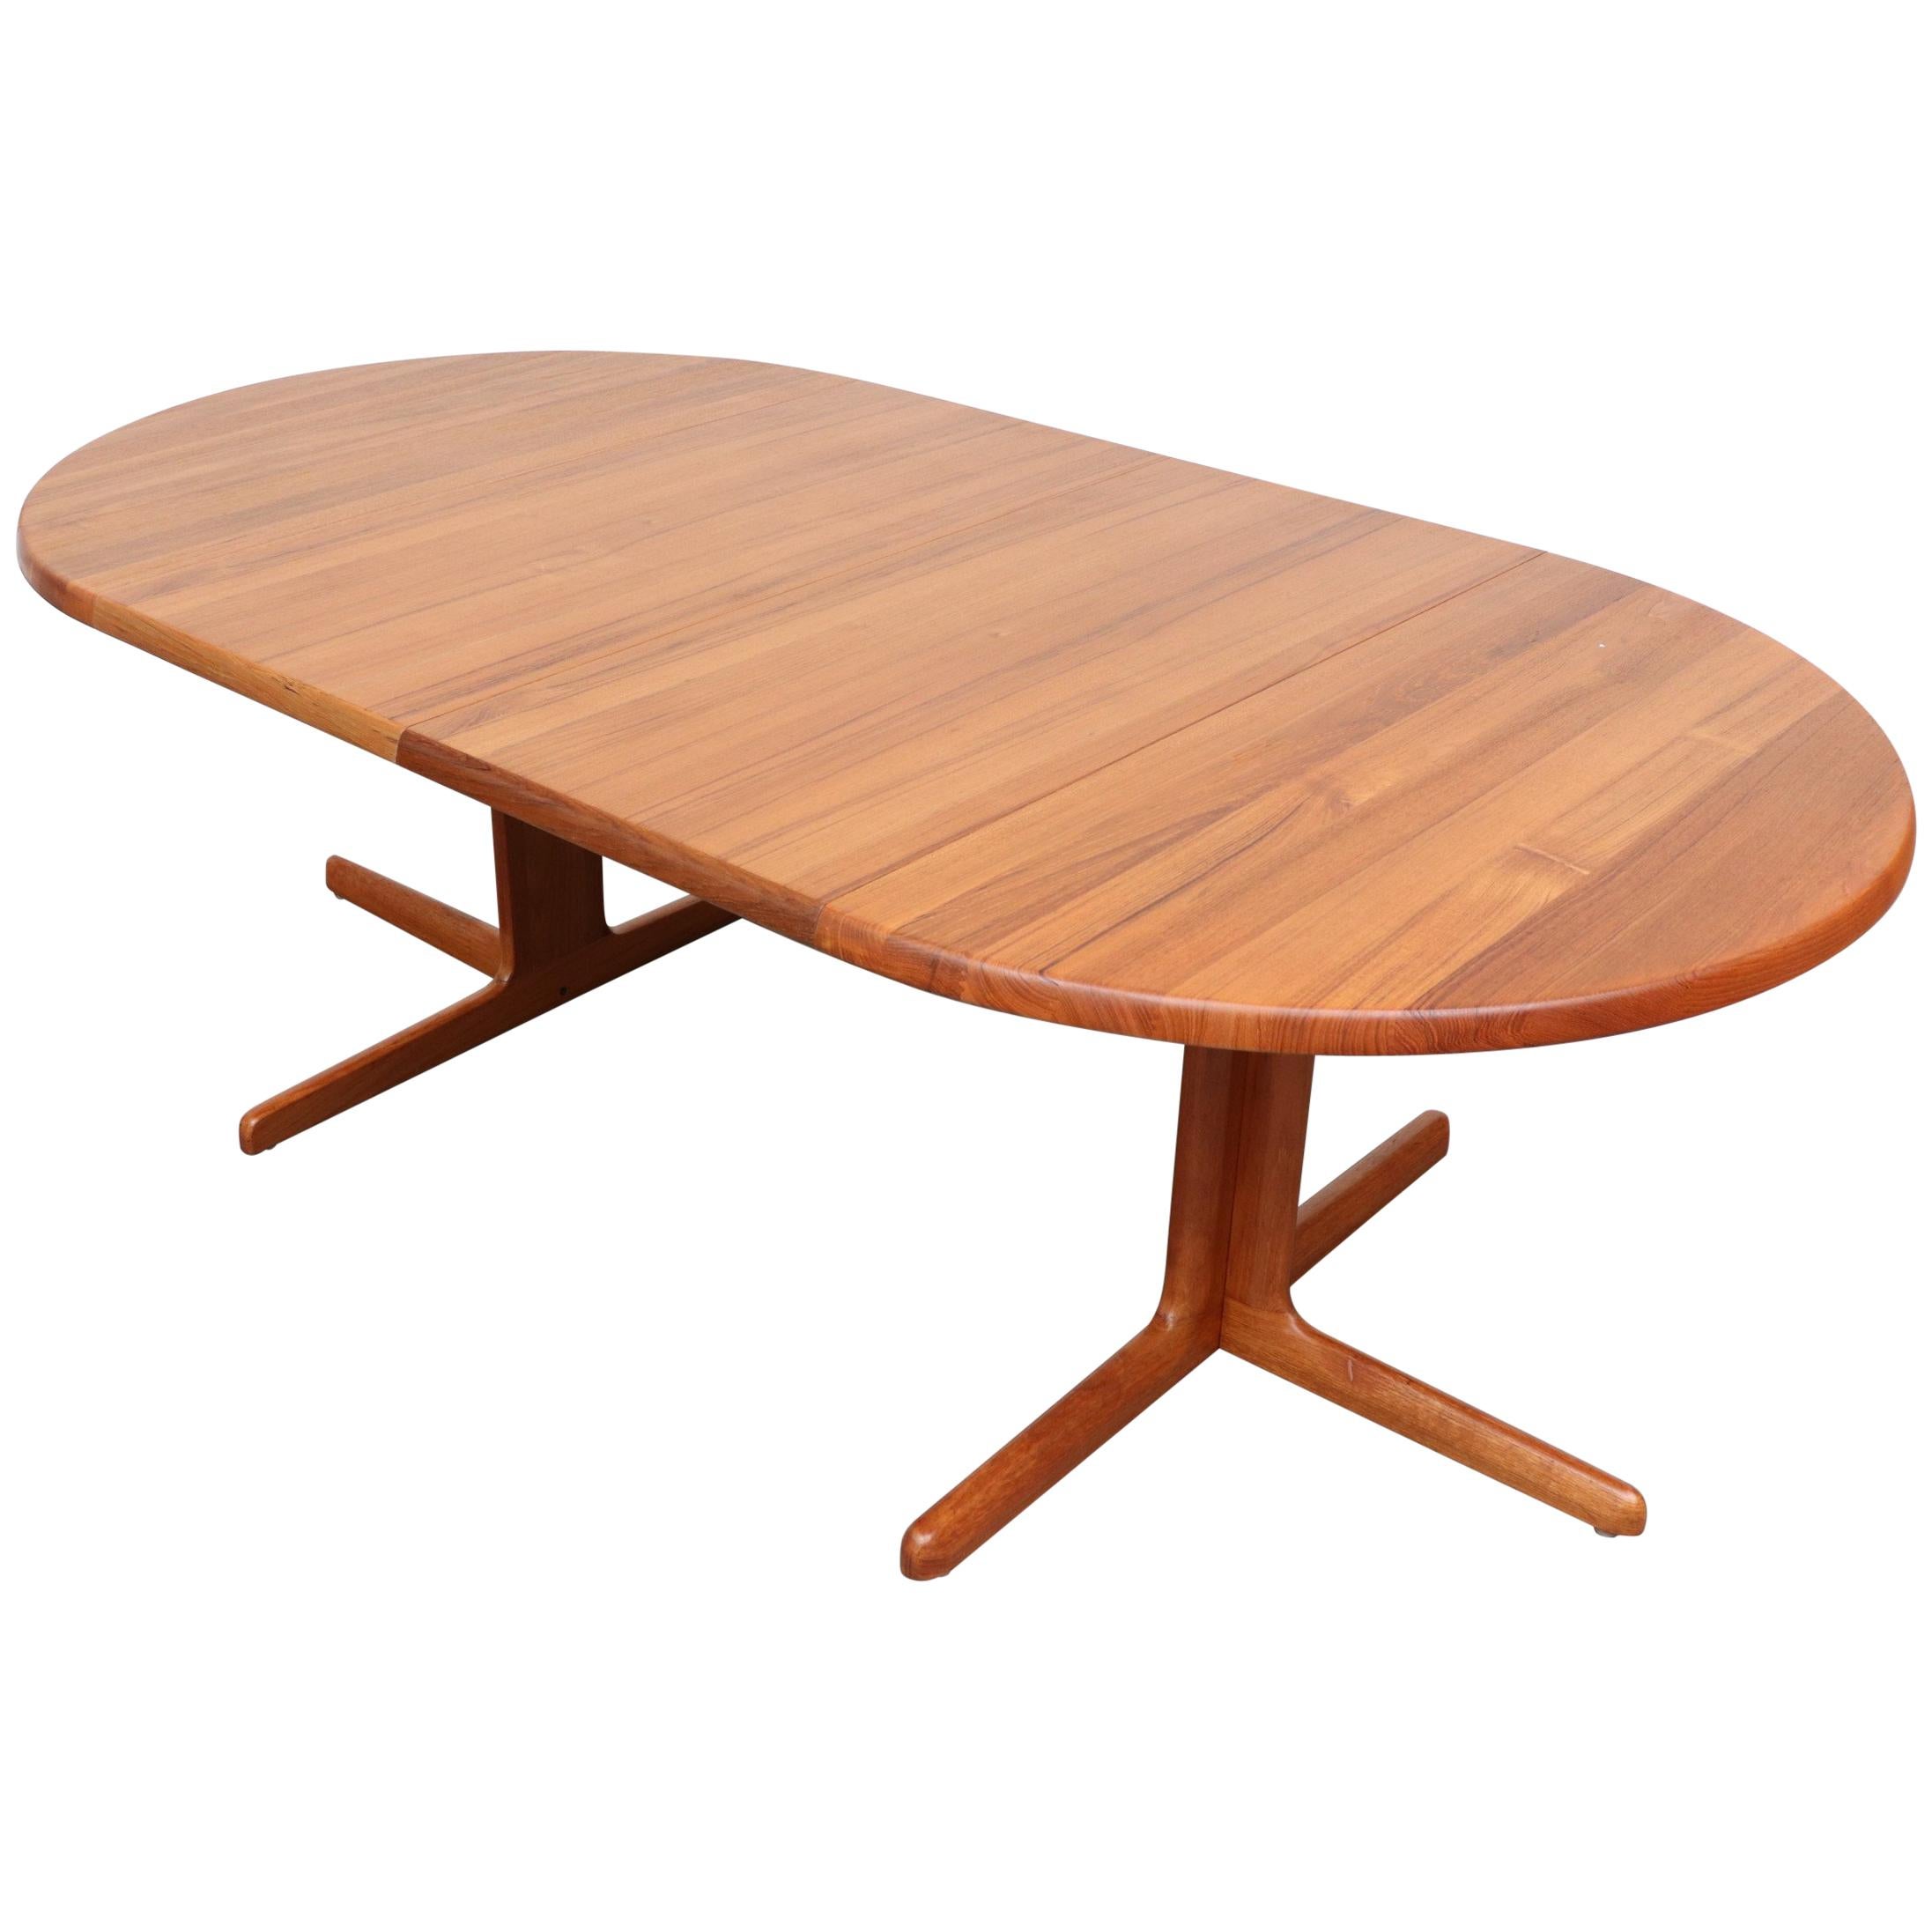 Danish Teak Round to Oval Dining Table with 2 Leaves